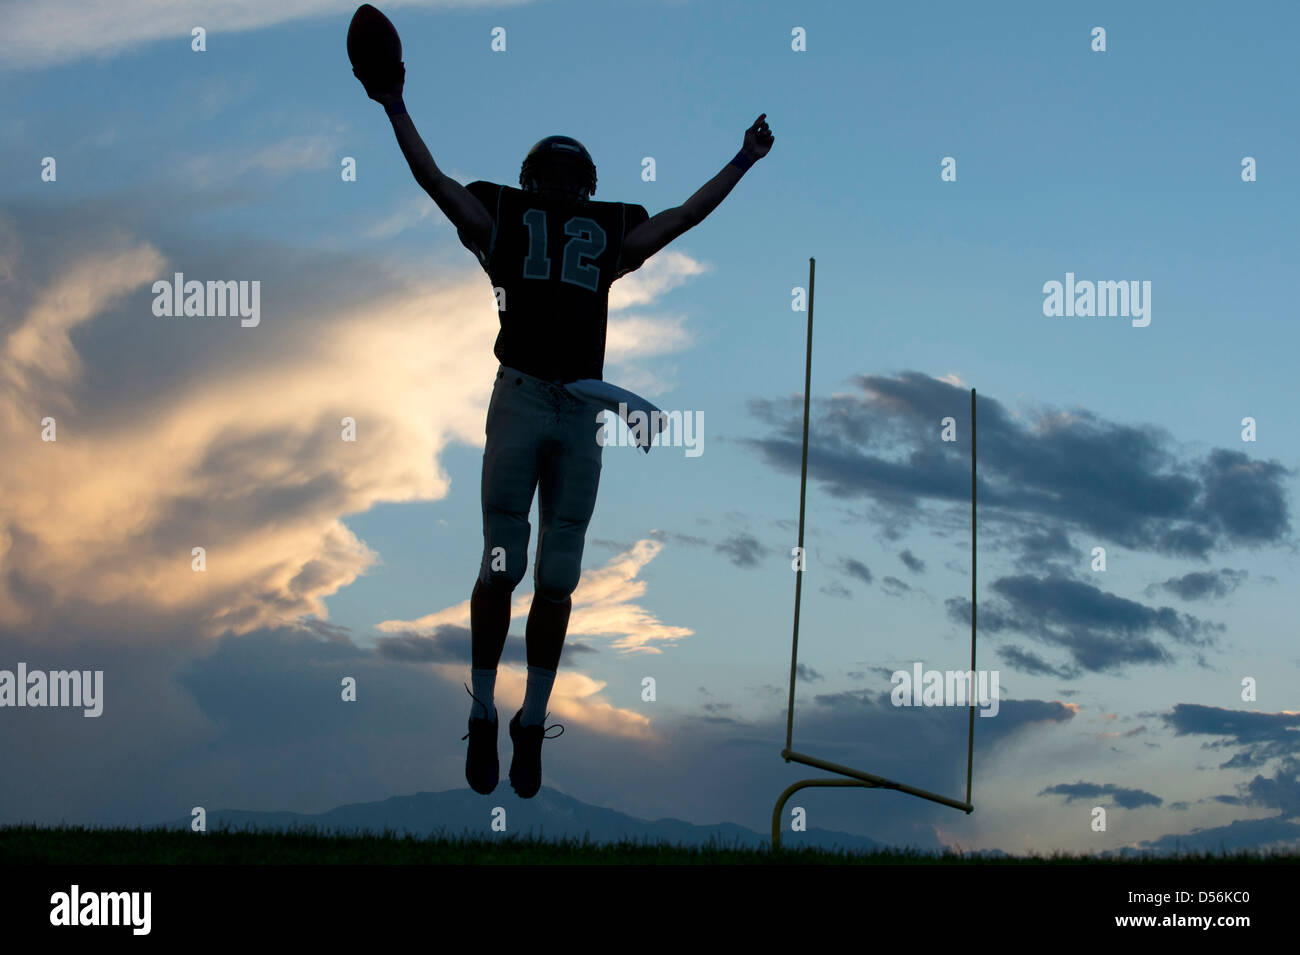 Football player cheering in game Banque D'Images